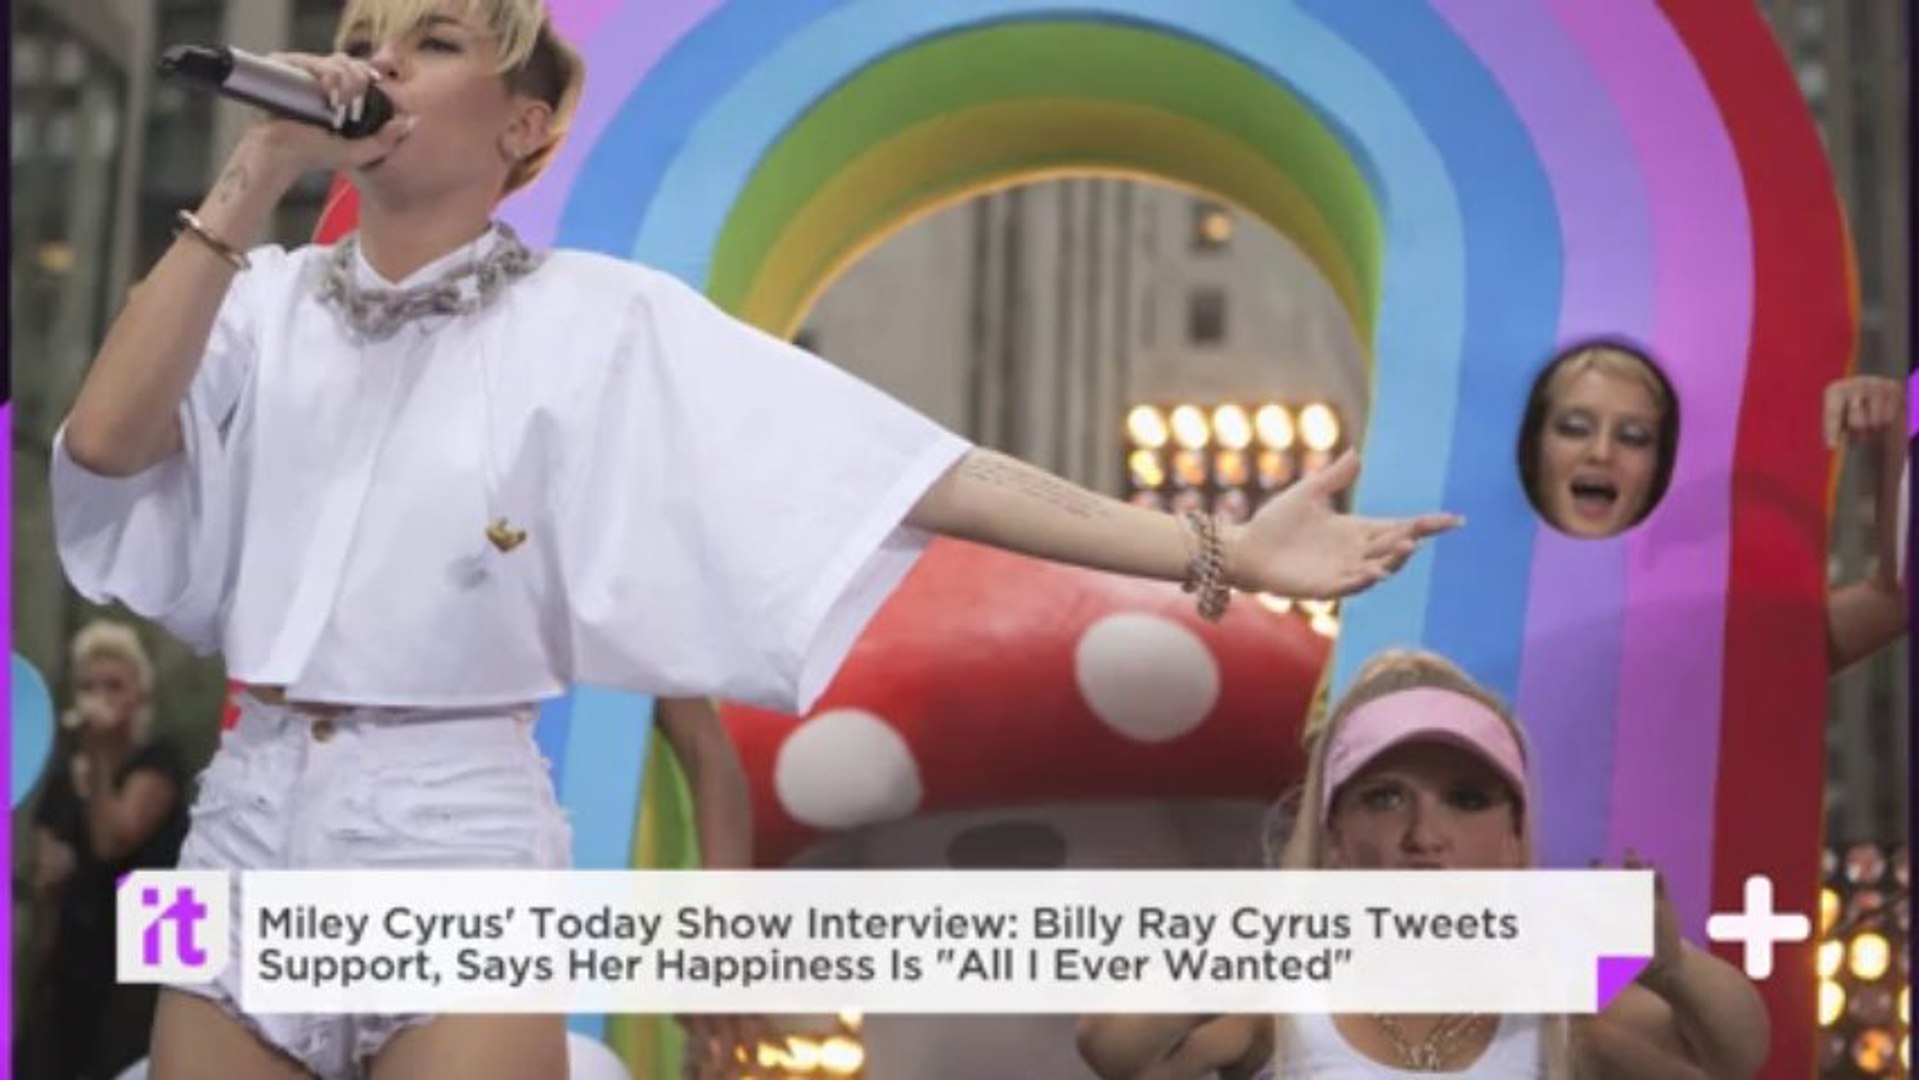 Miley Cyrus' Today Show Interview: Billy Ray Cyrus Tweets Support, Says Her Happiness Is